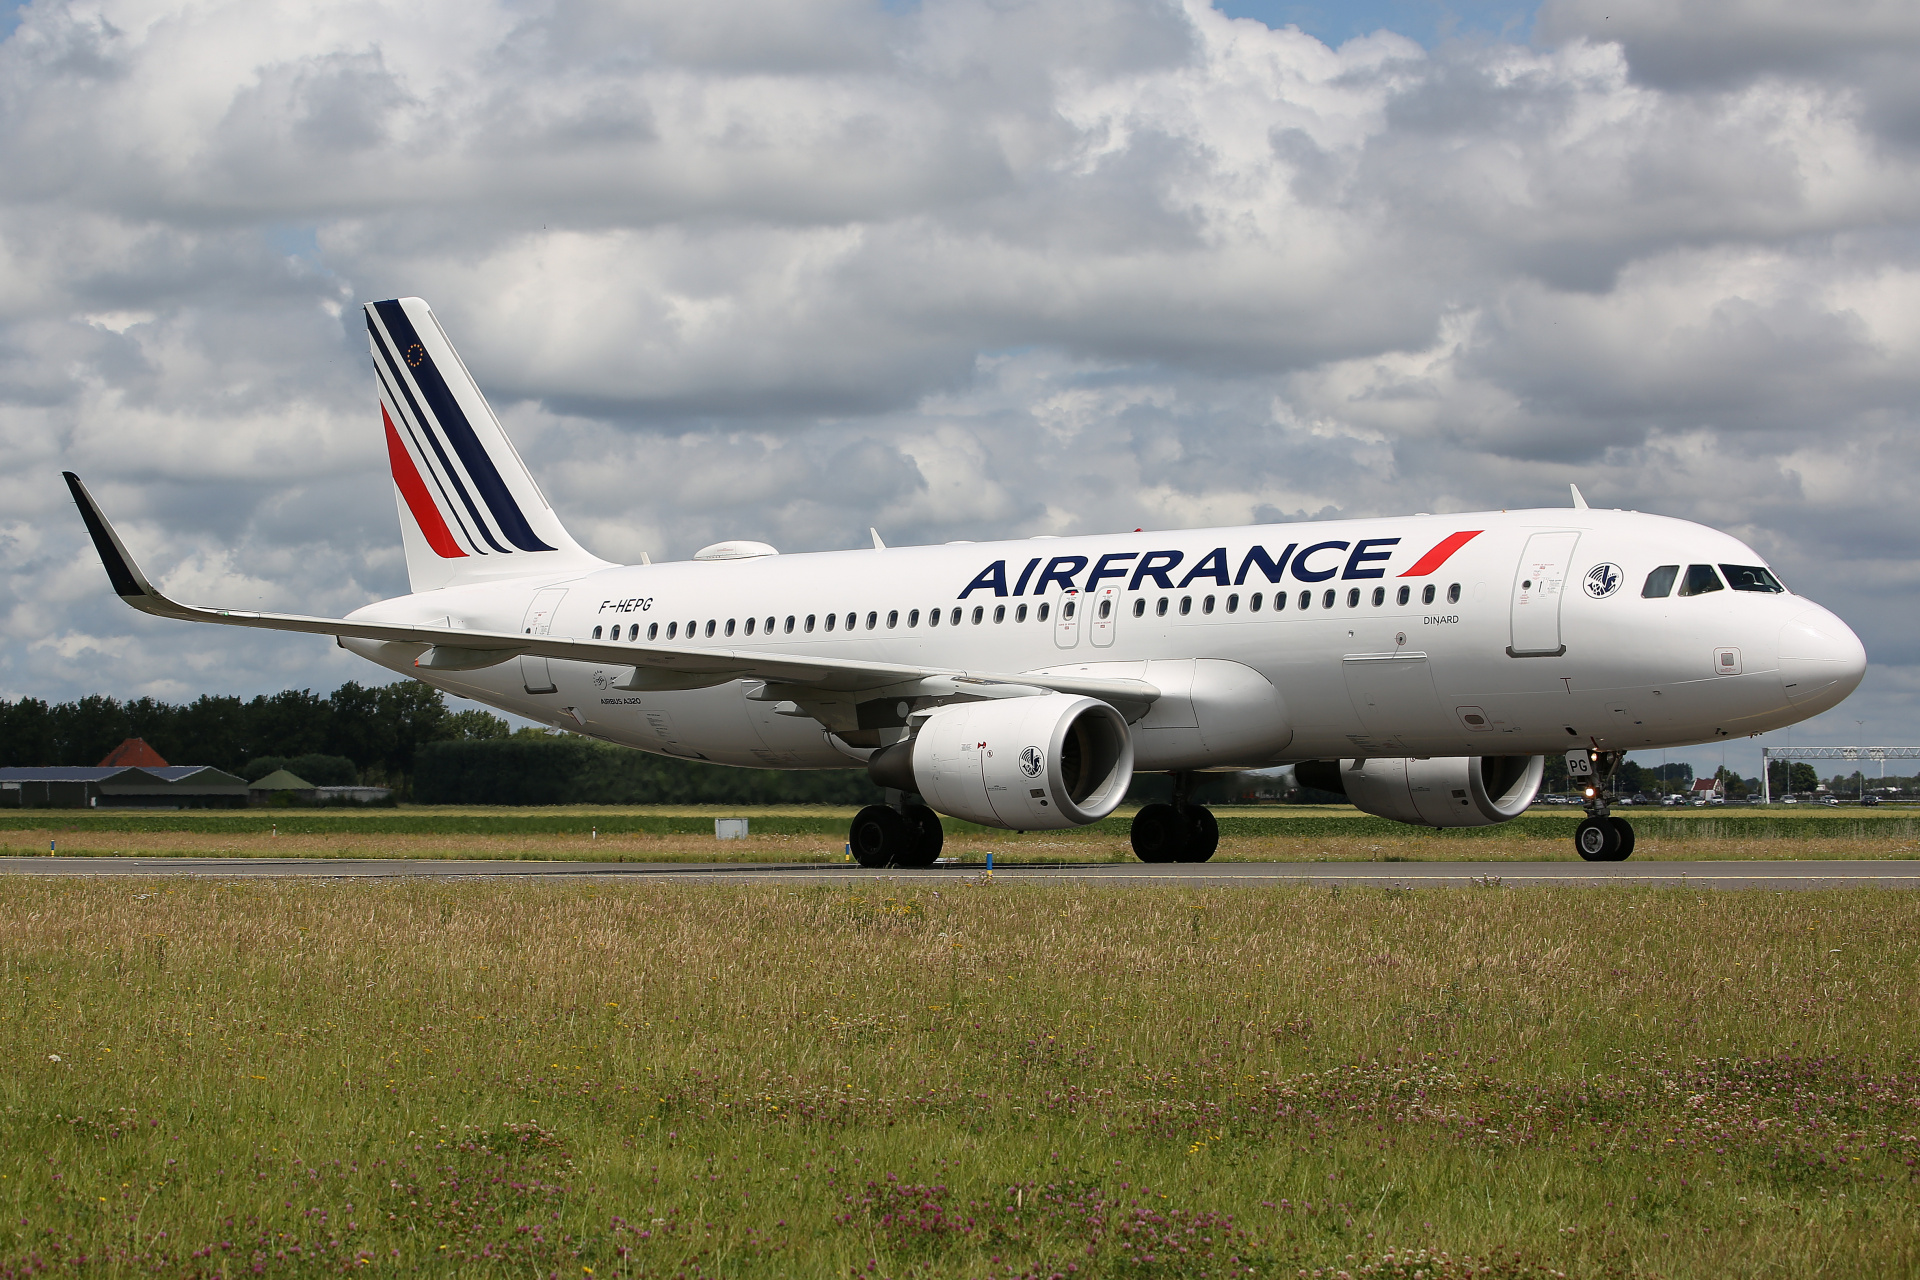 F-HEPG, Air France (Aircraft » Schiphol Spotting » Airbus A320-200)